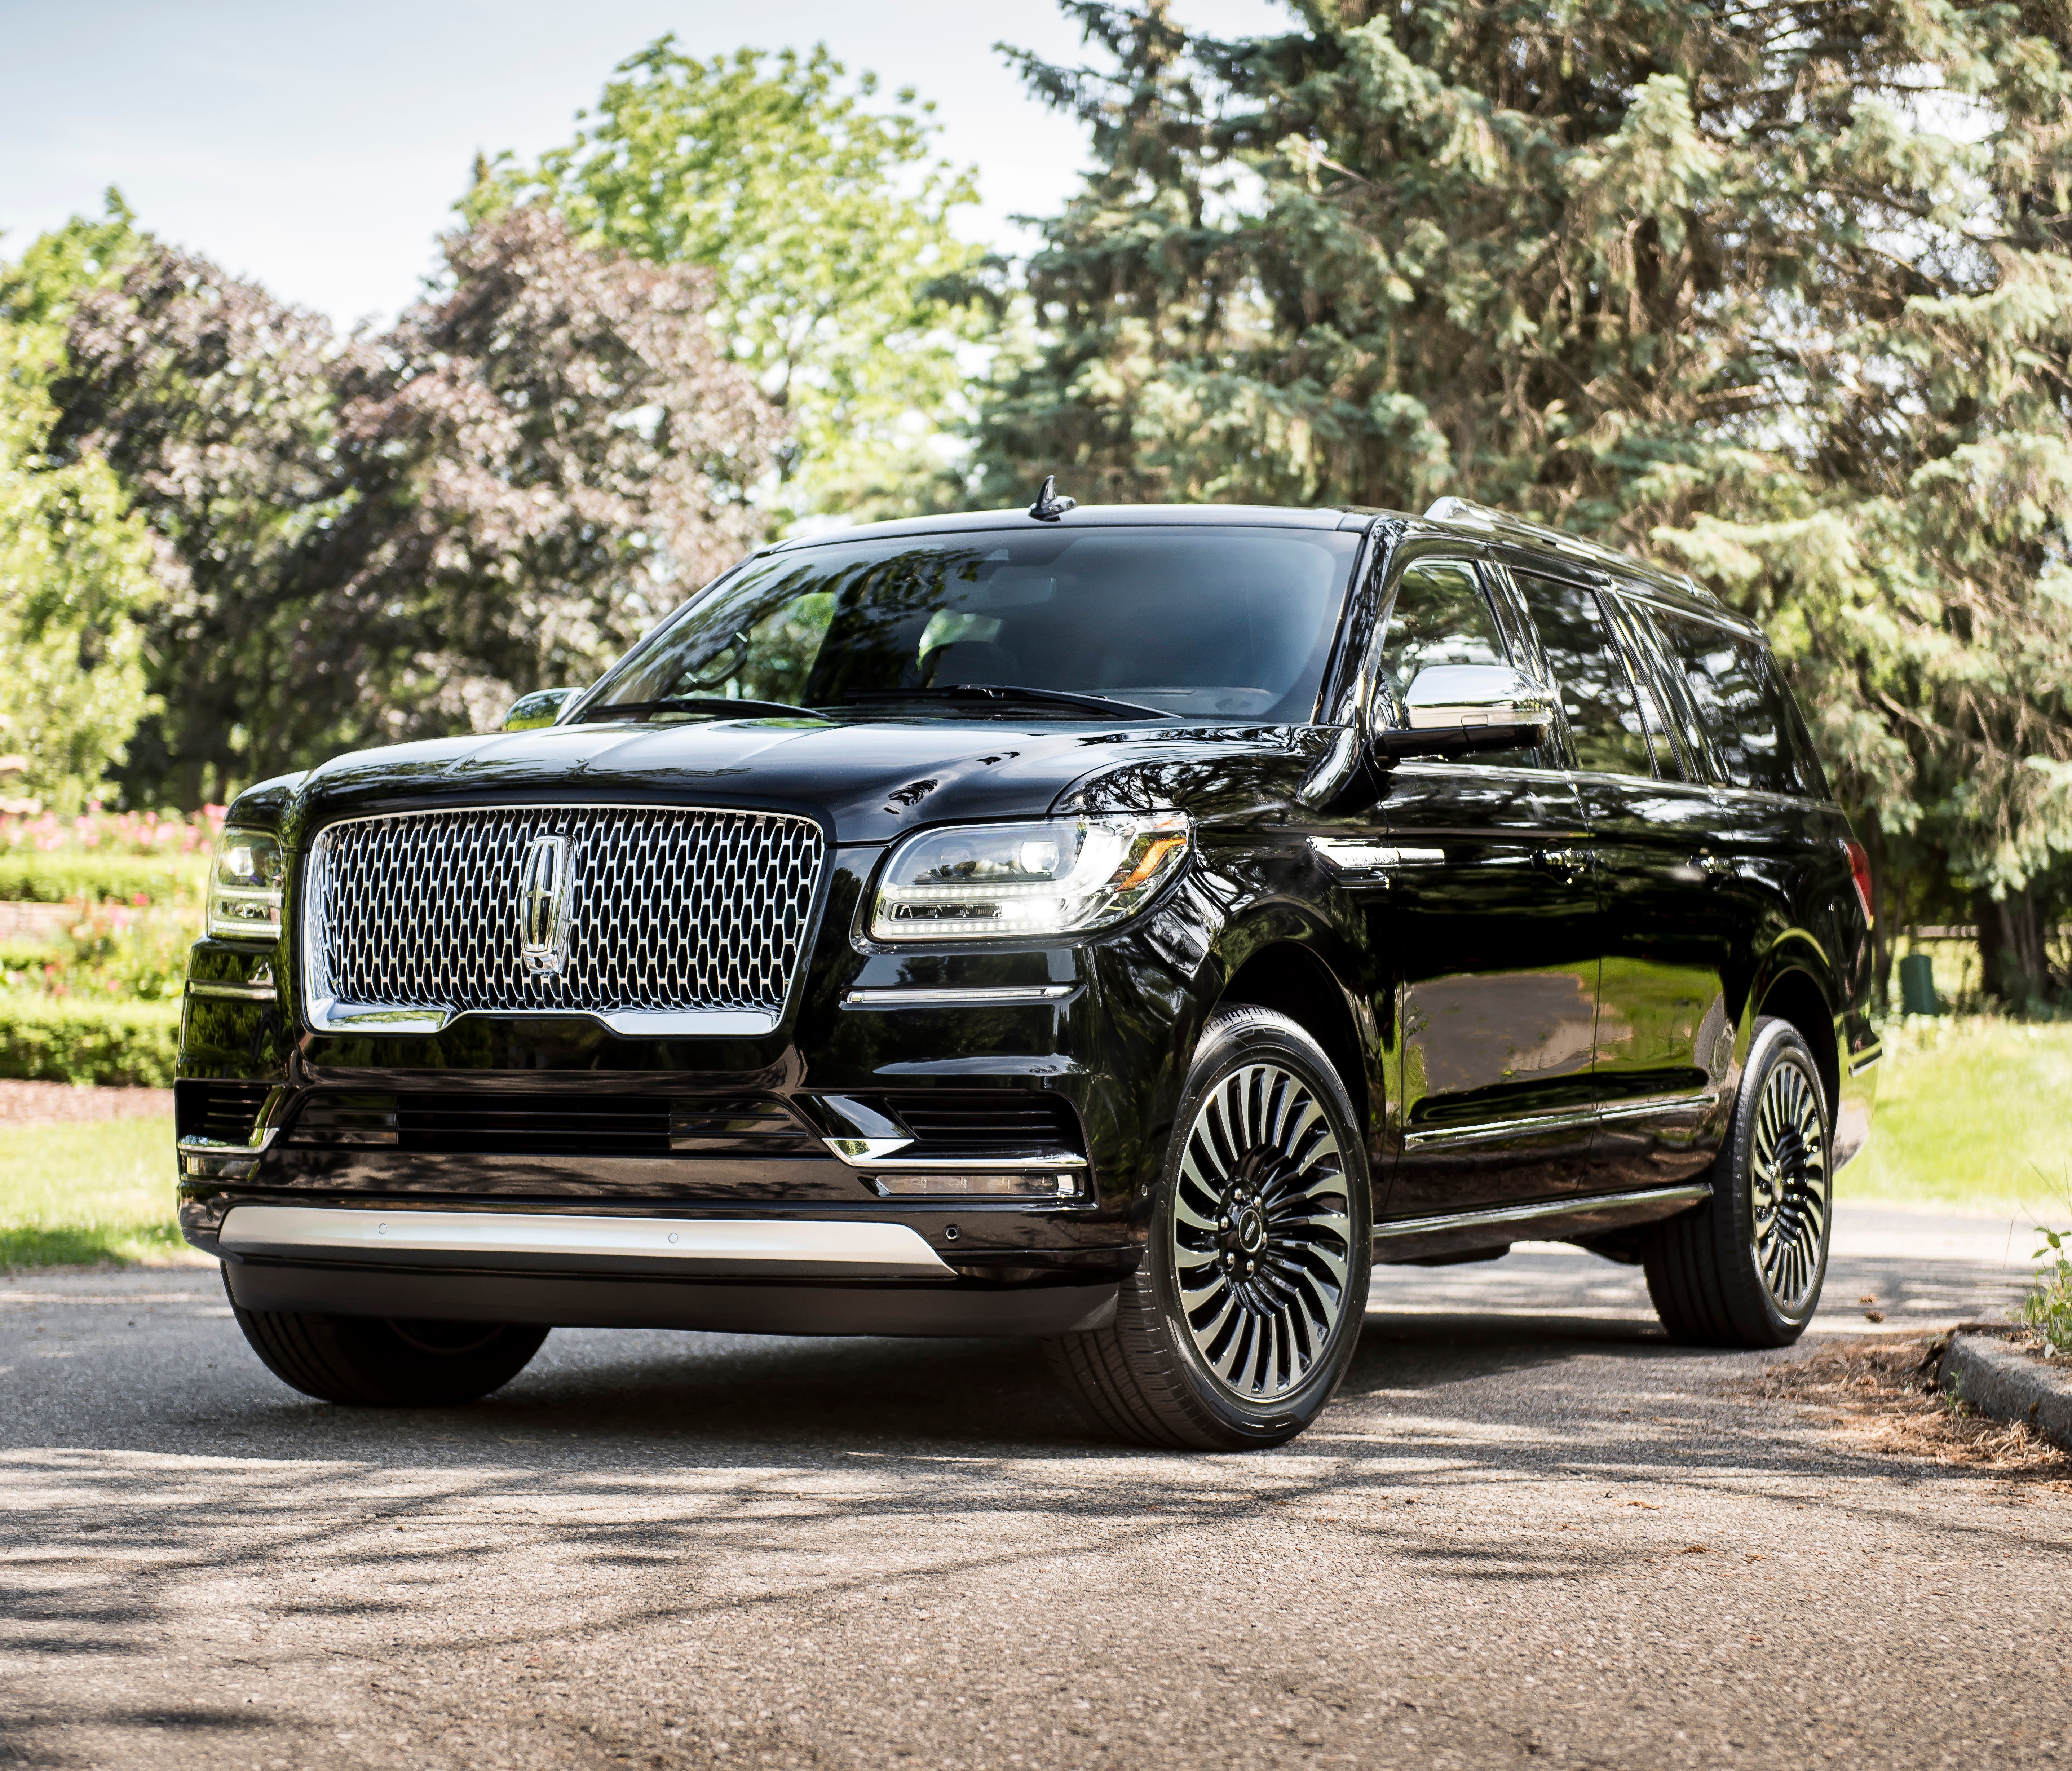 Lincoln Navigator is even more premium as the Black Label edition